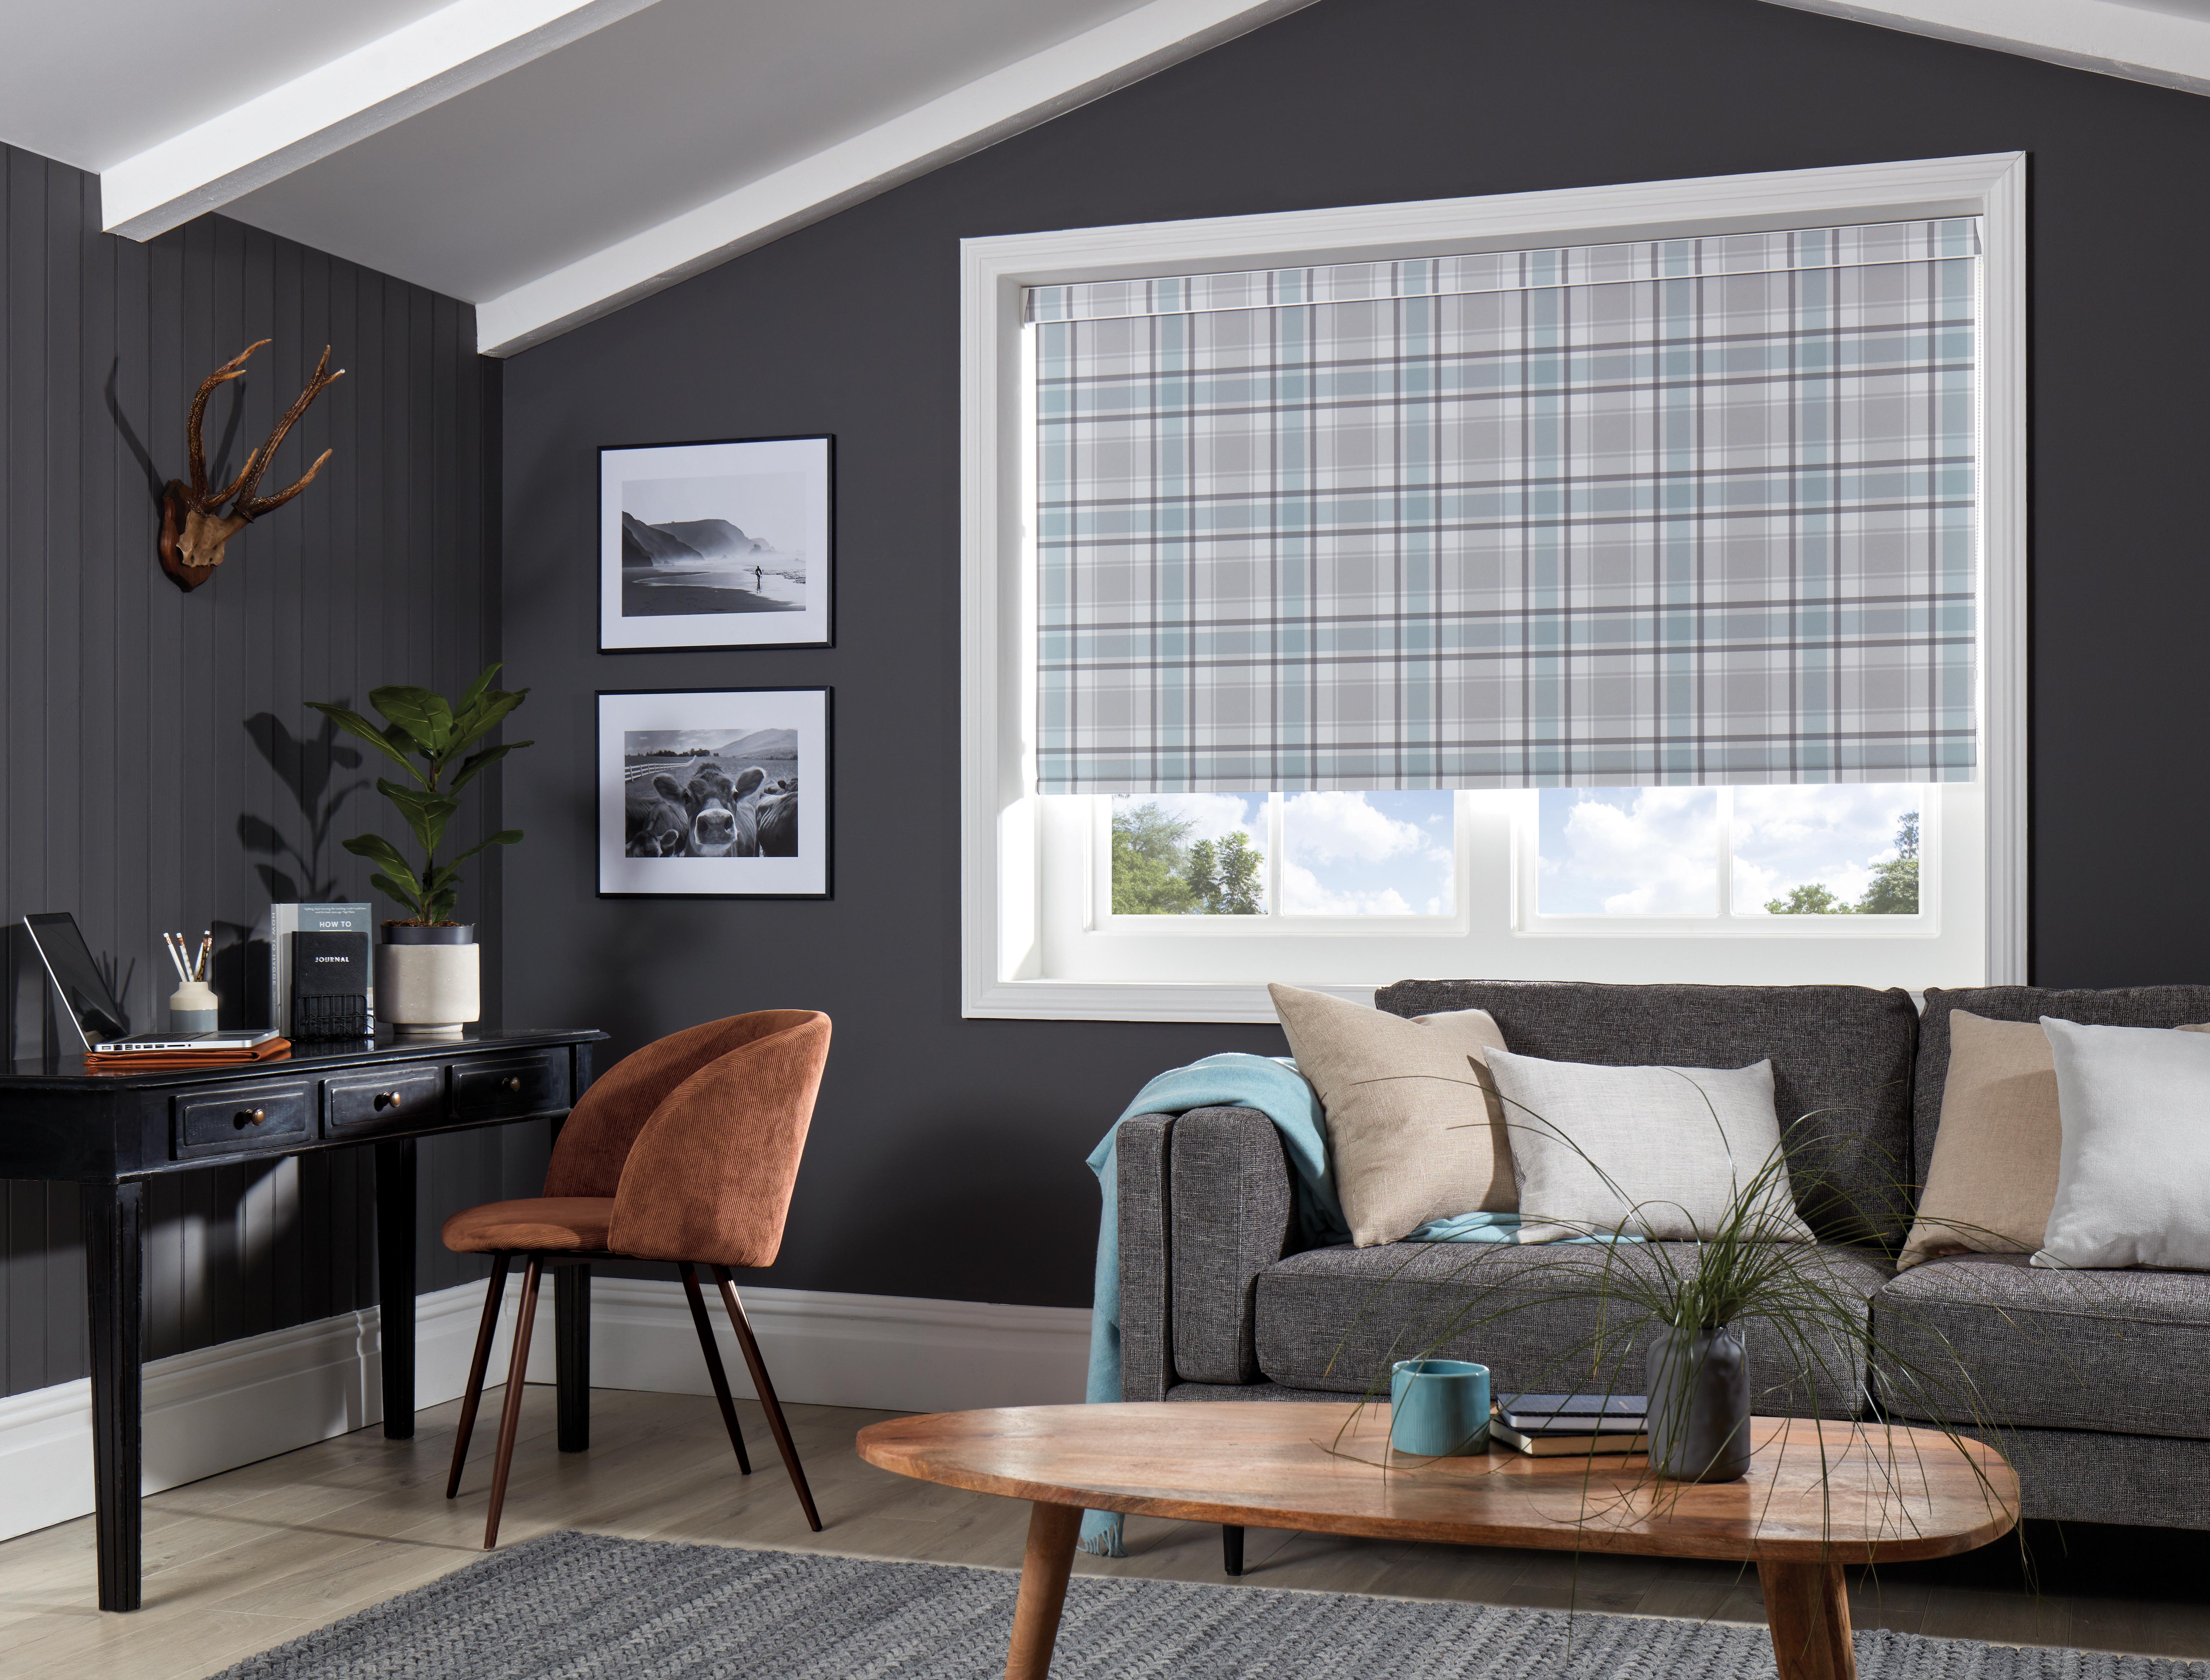 How do roller blinds keep my home cool in the summer?